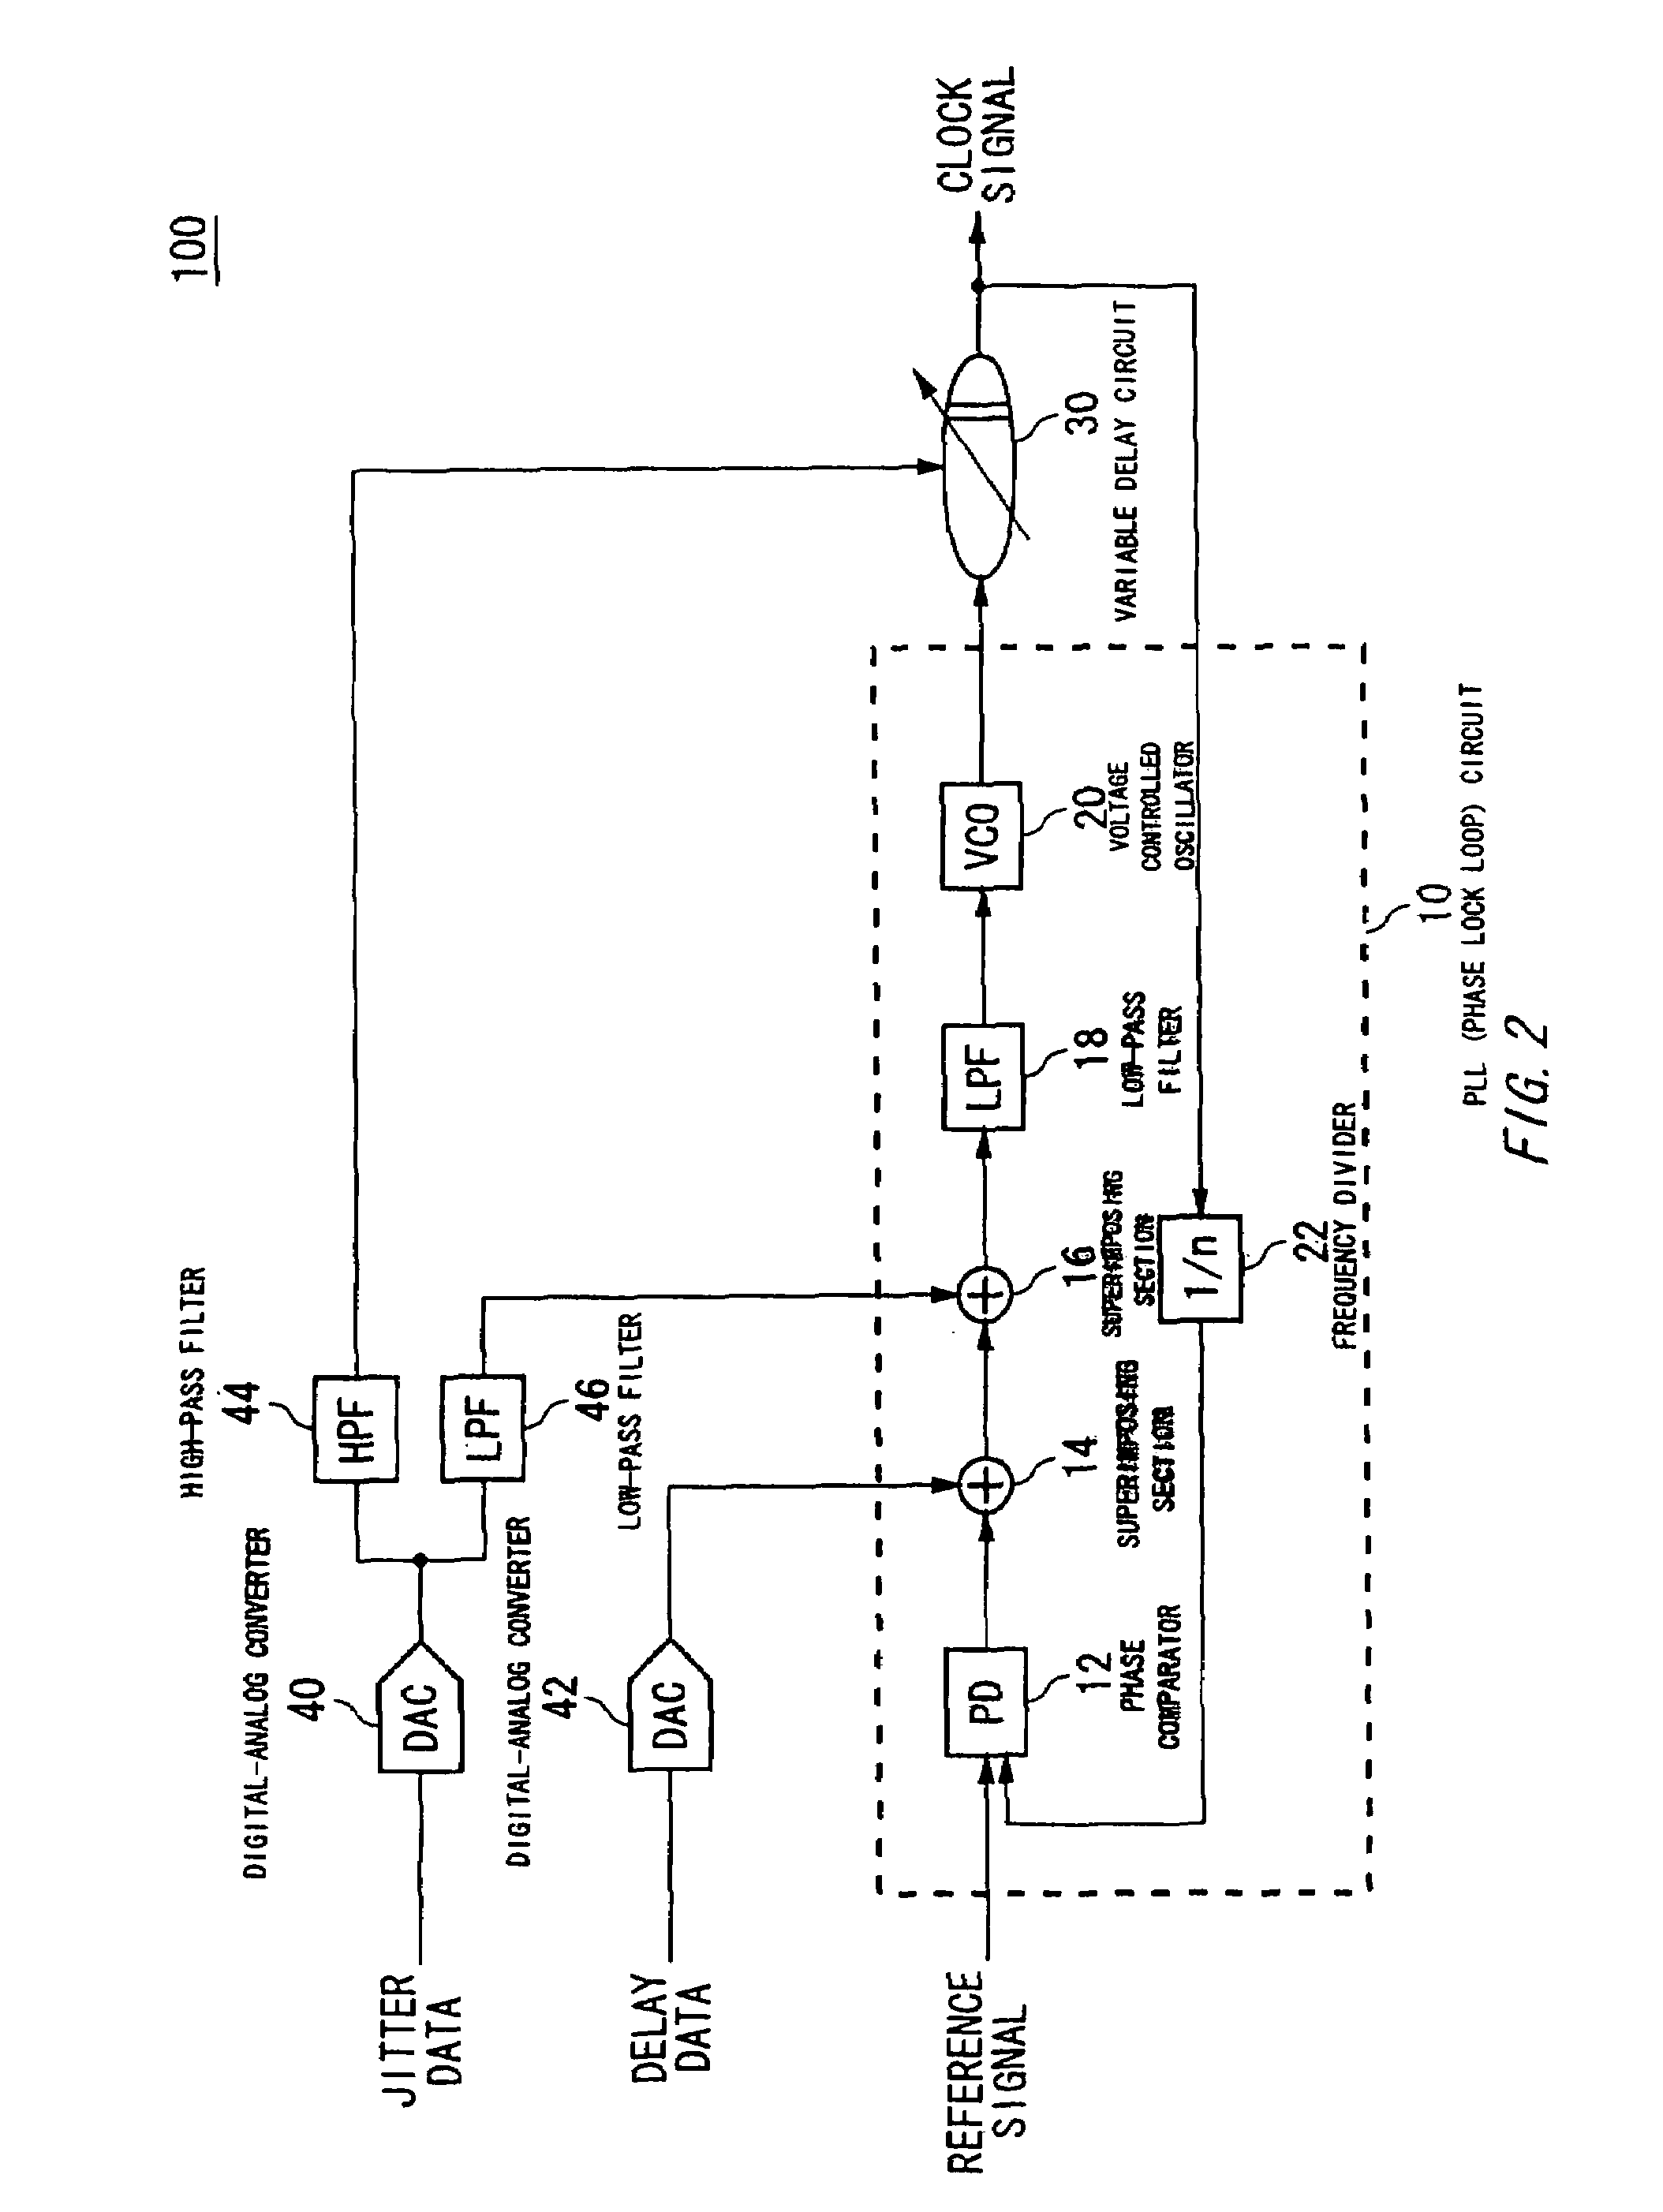 Jitter applying circuit and test apparatus